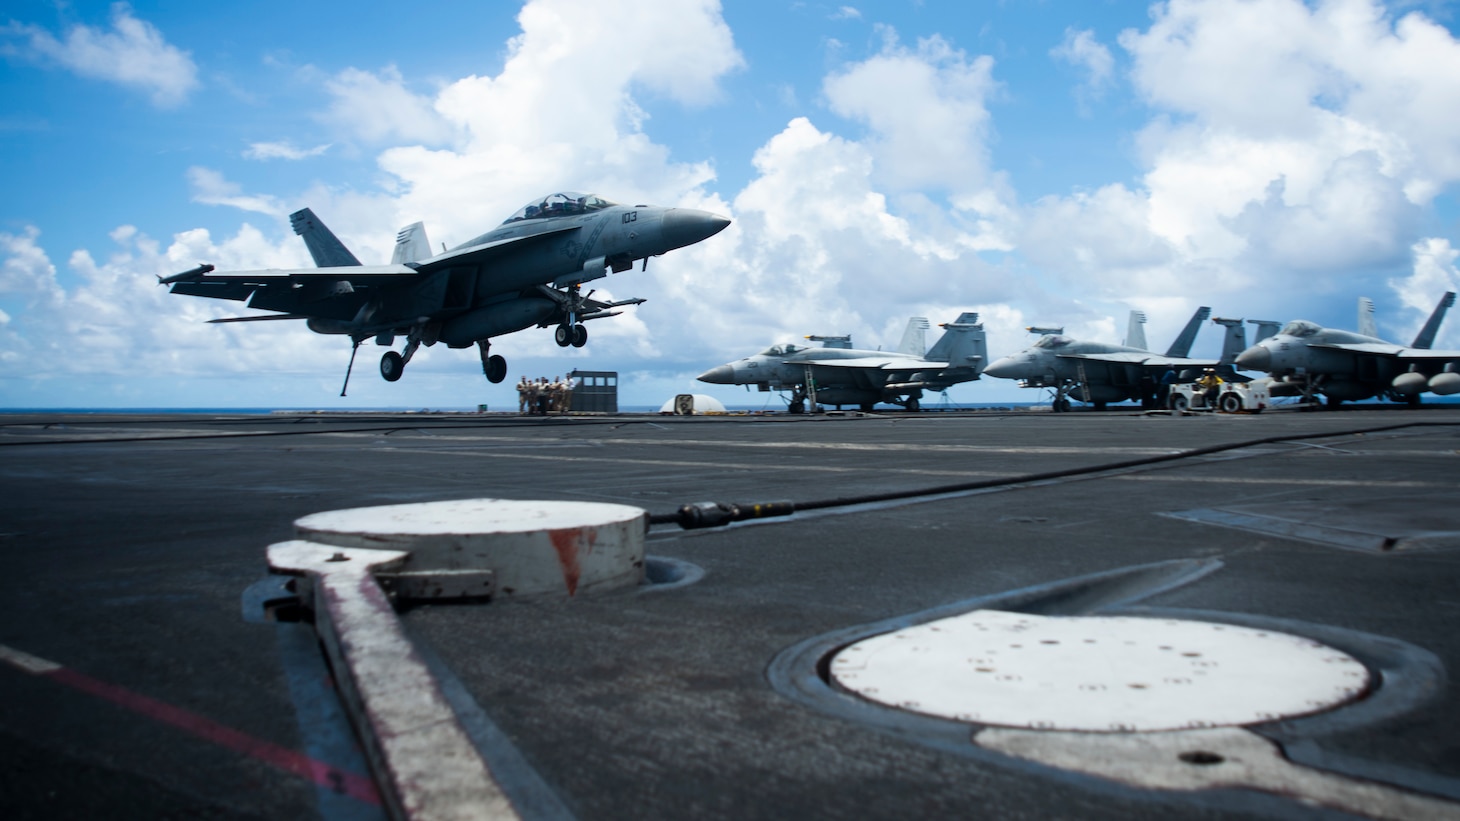 200814-N- KP021-0245 SOUTH CHINA SEA (August 14, 2020) An F/A-18F assigned to the “Diamondbacks” of Strike Fighter Squadron (VFA) 102 lands on the flight deck of America’s only forward-deployed aircraft carrier USS Ronald Reagan (CVN 76)  while conducting operations in the South China Sea. Ronald Reagan, the flagship of Carrier Strike Group 5, provides a combat-ready force that protects and defends the United States, as well the collective maritime interests of its allies and partners in the Indo-Pacific region. (U.S. Navy photo by Mass Communication Specialist 2nd Class Codie L. Soule)